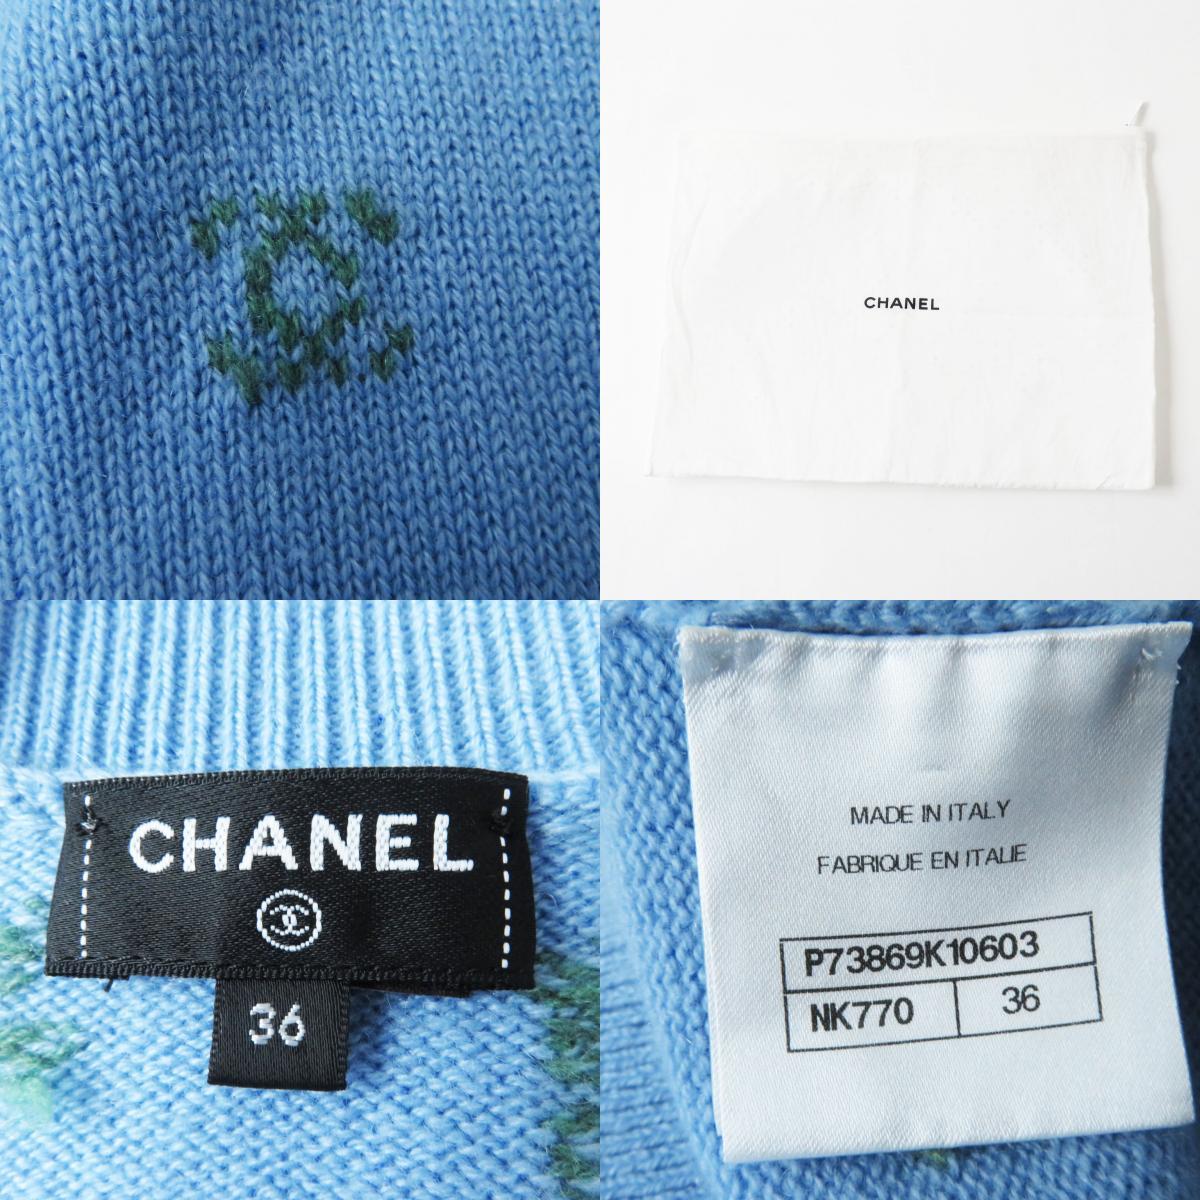  ultimate beautiful goods CHANEL Chanel 22 year made P73869 P73823 cashmere 100% Stone attaching here Mark button setup light blue 36*38 sack attaching made in Italy lady's 